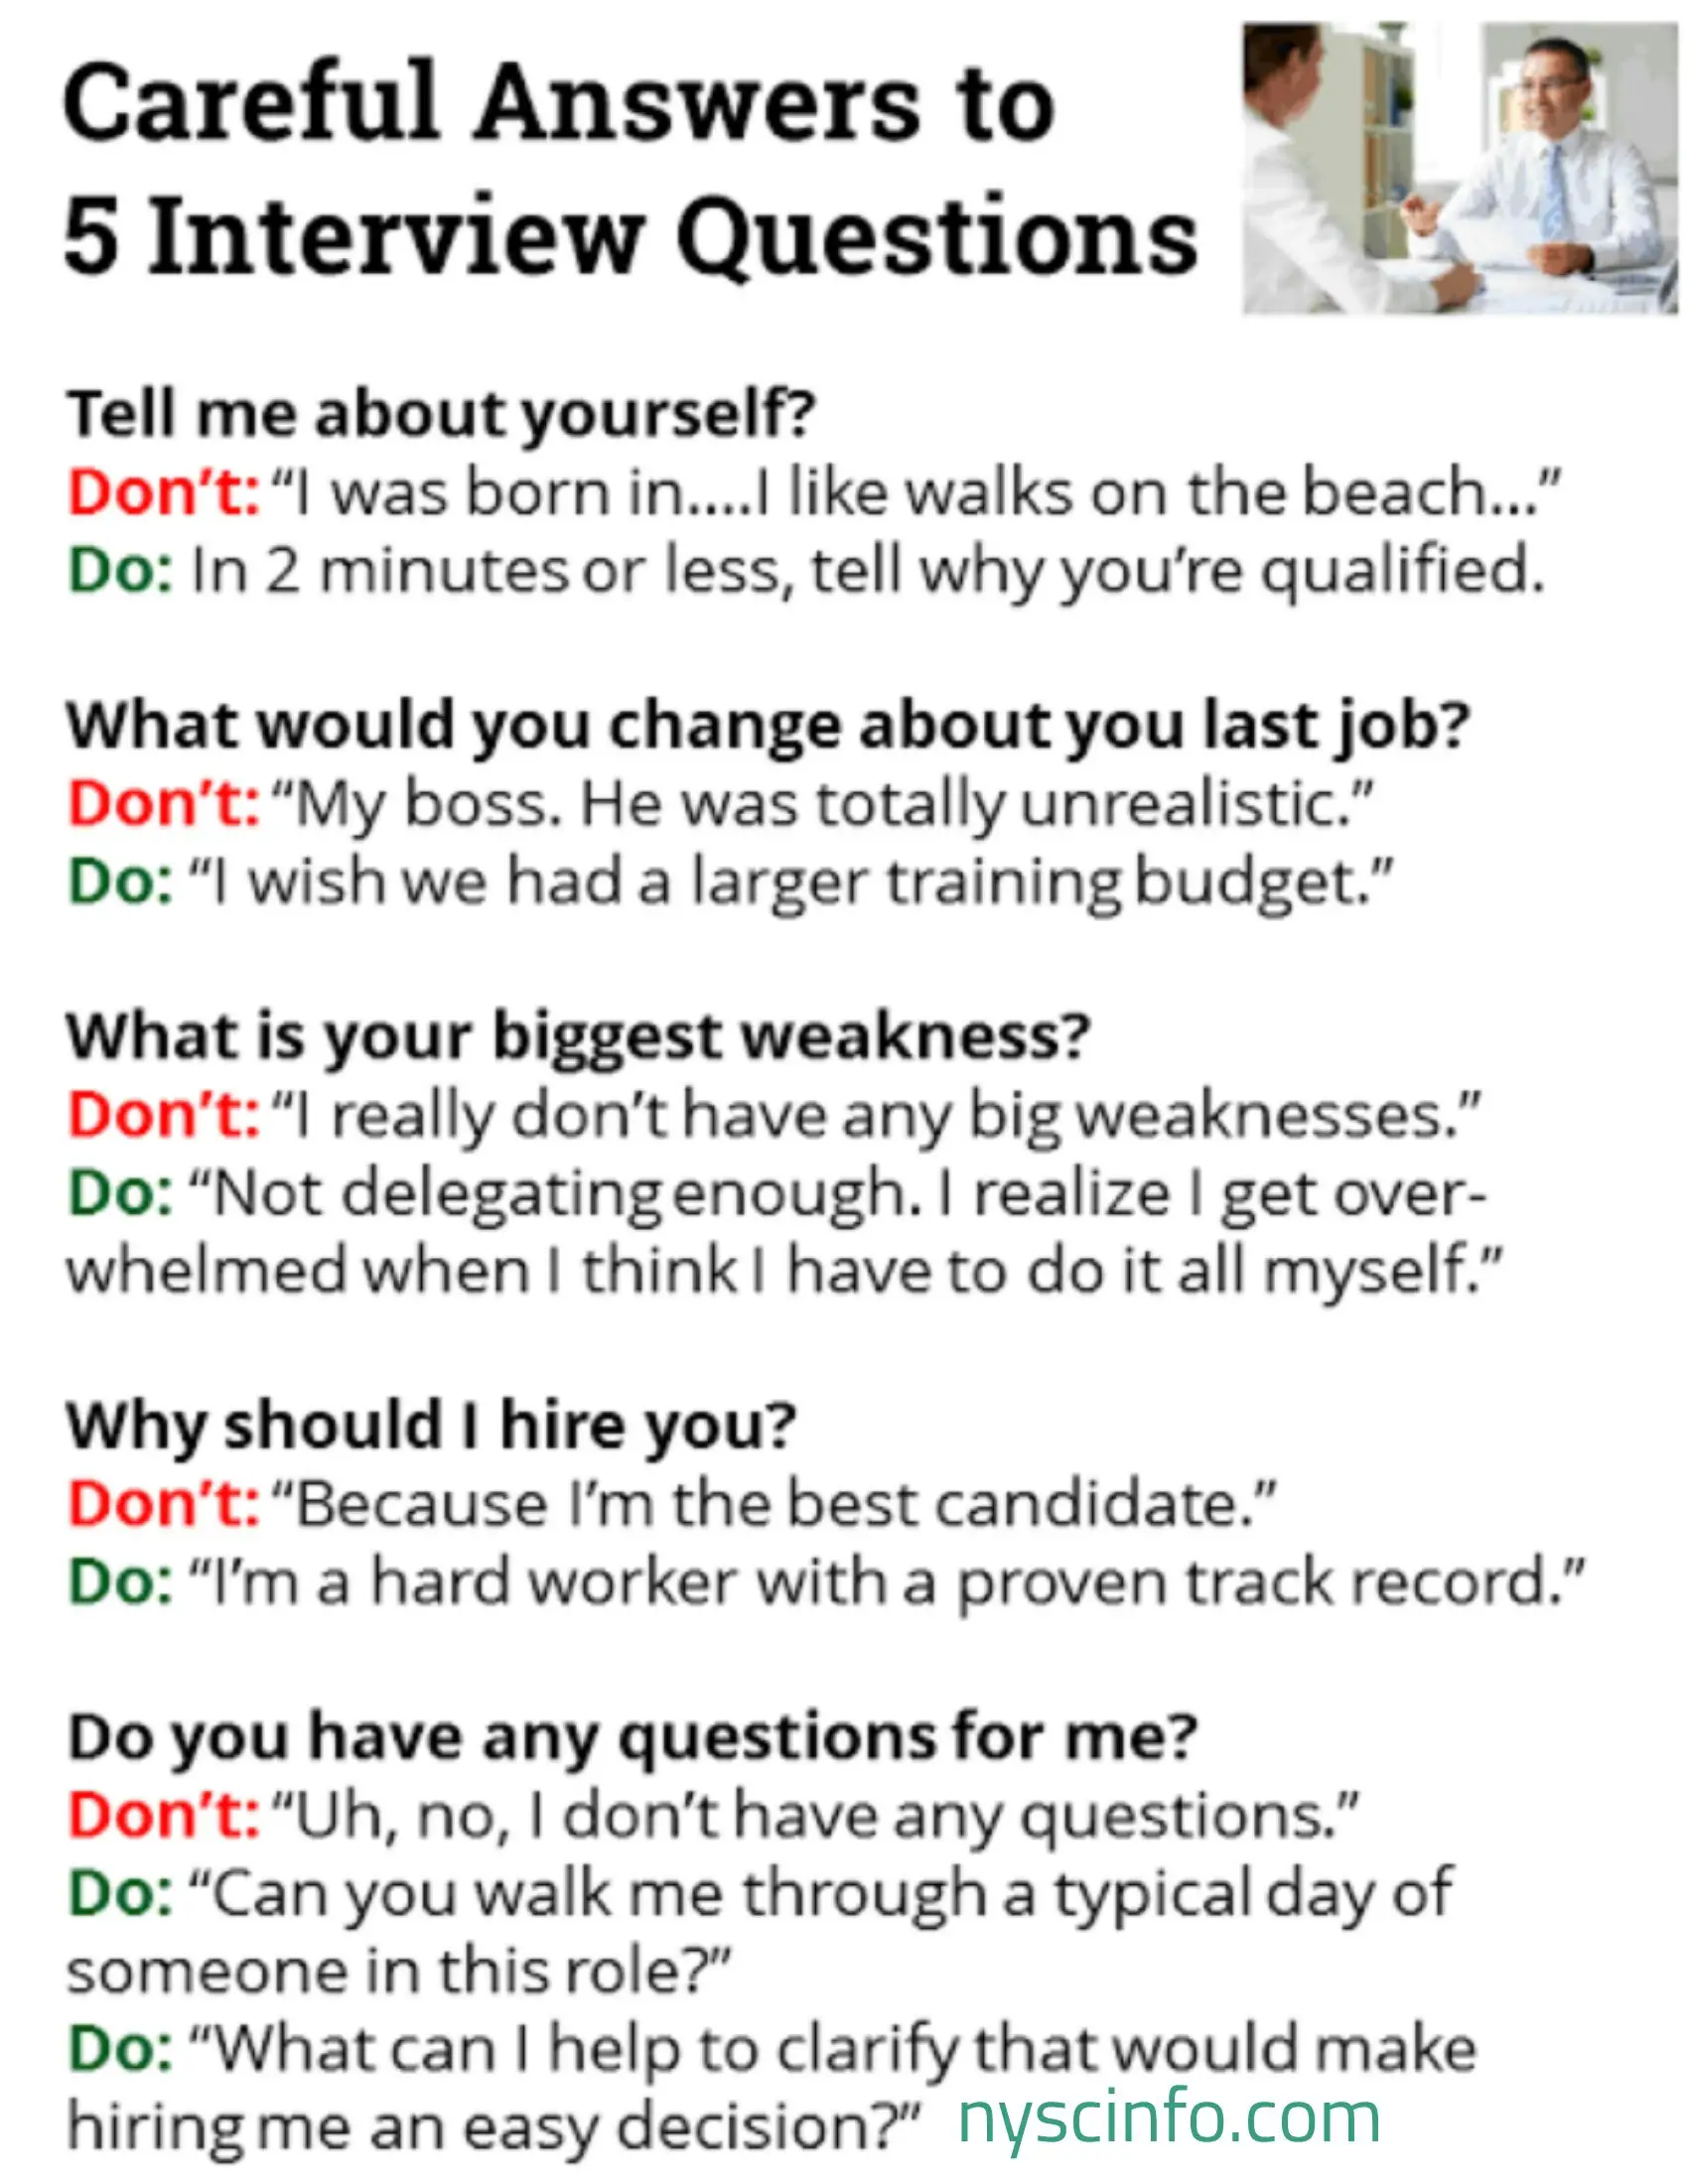 10 Tough Job Interview Questions and Answers â Nyscinfo.com